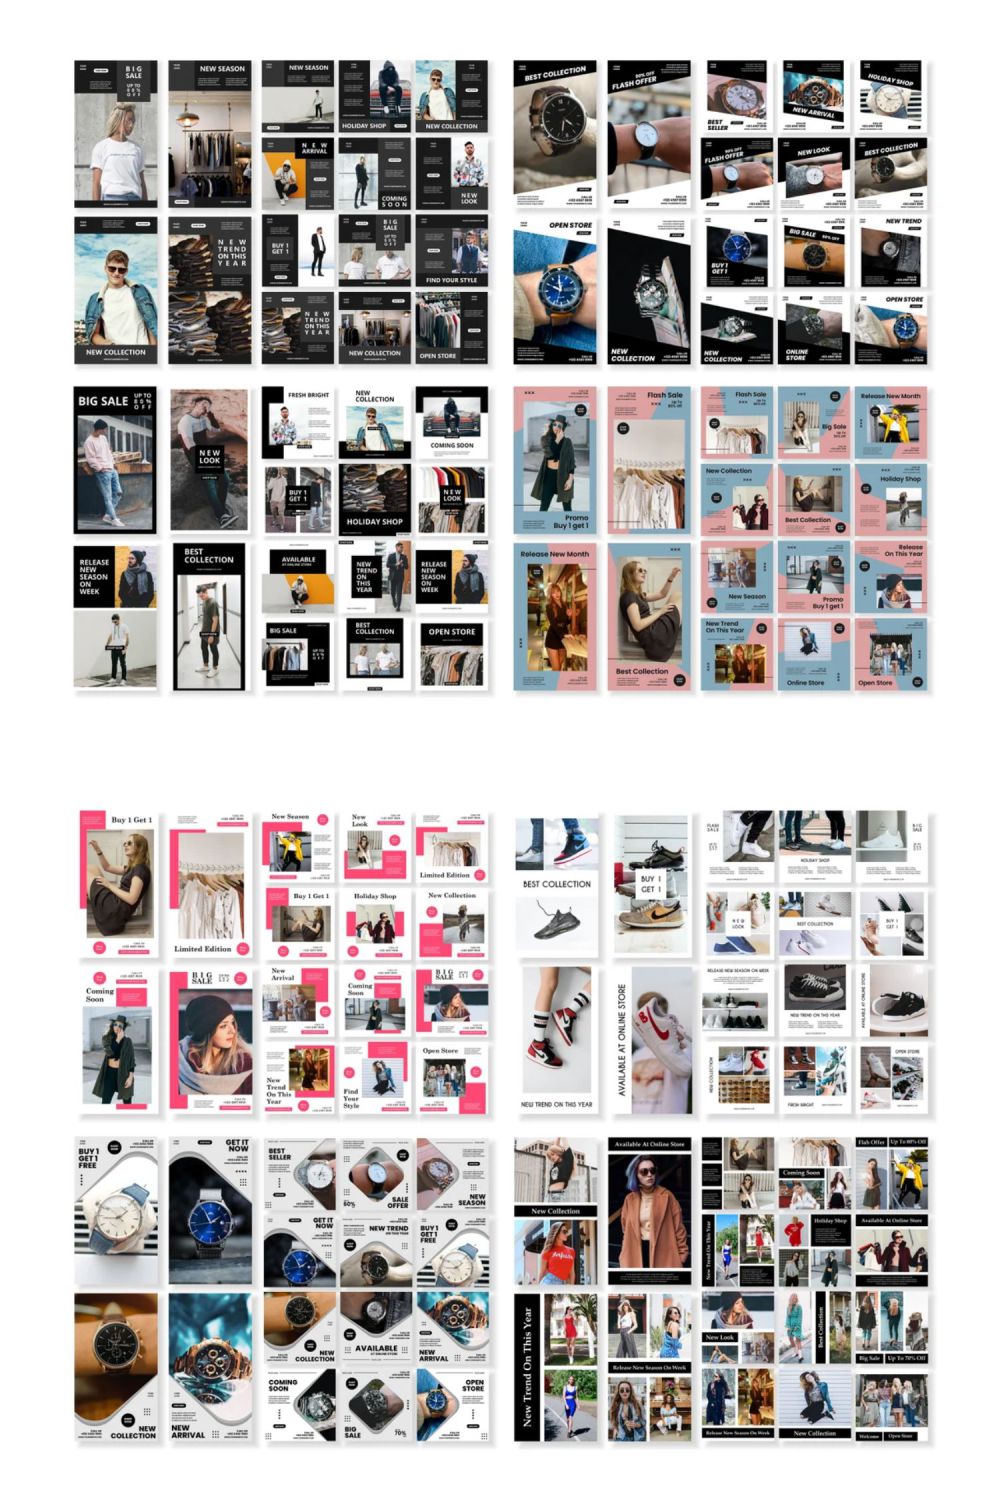 Social Media Bundle Template For Fashion And Style Pinterest Image.